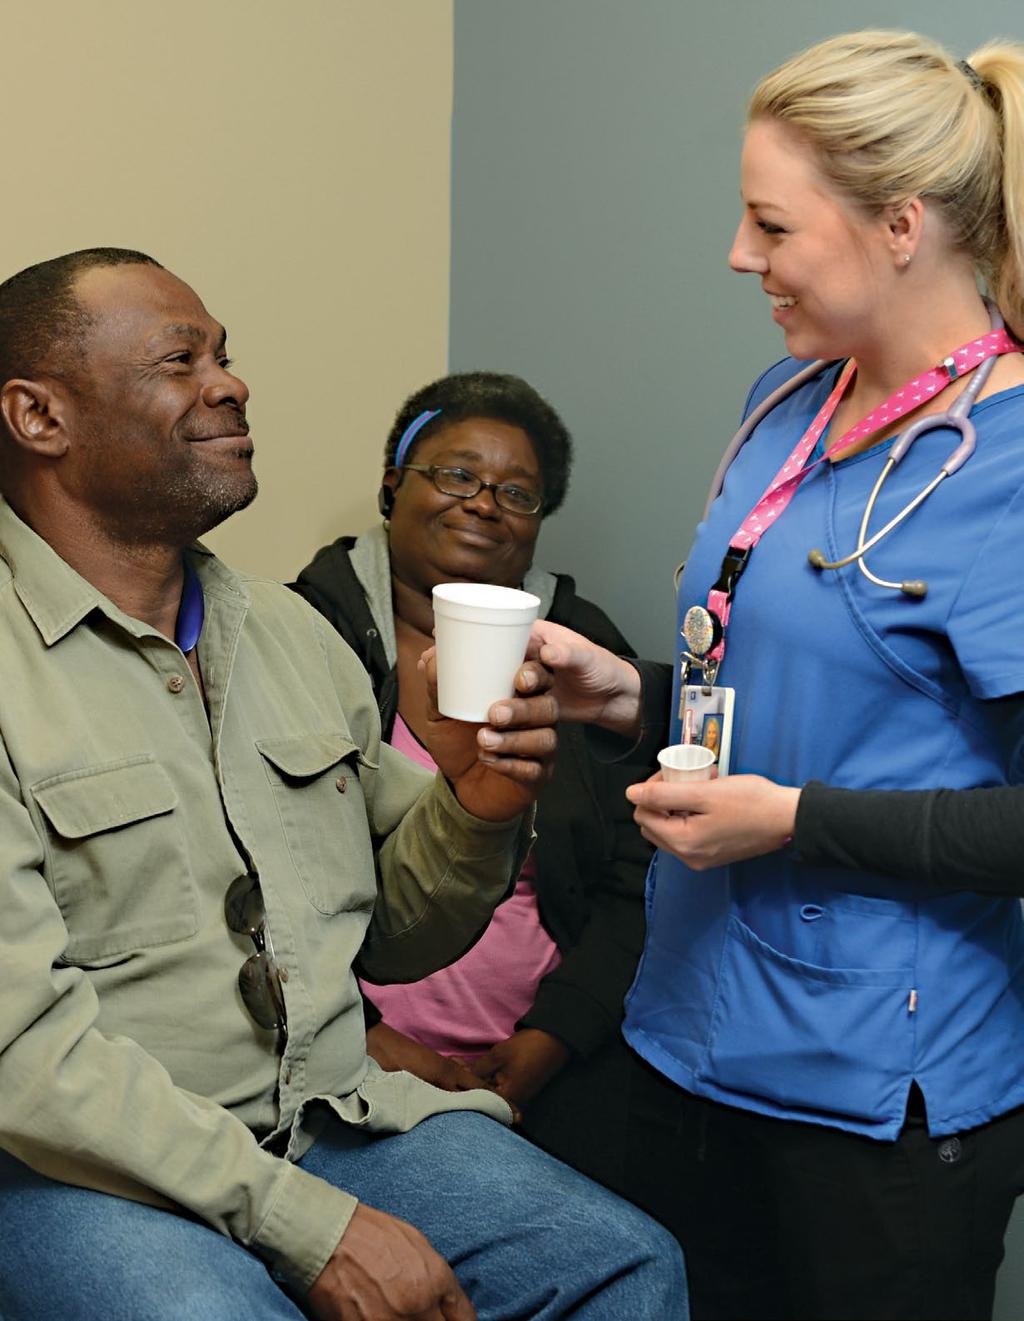 Serving our patients is not just a job it s a calling in which we invest our hearts and minds.